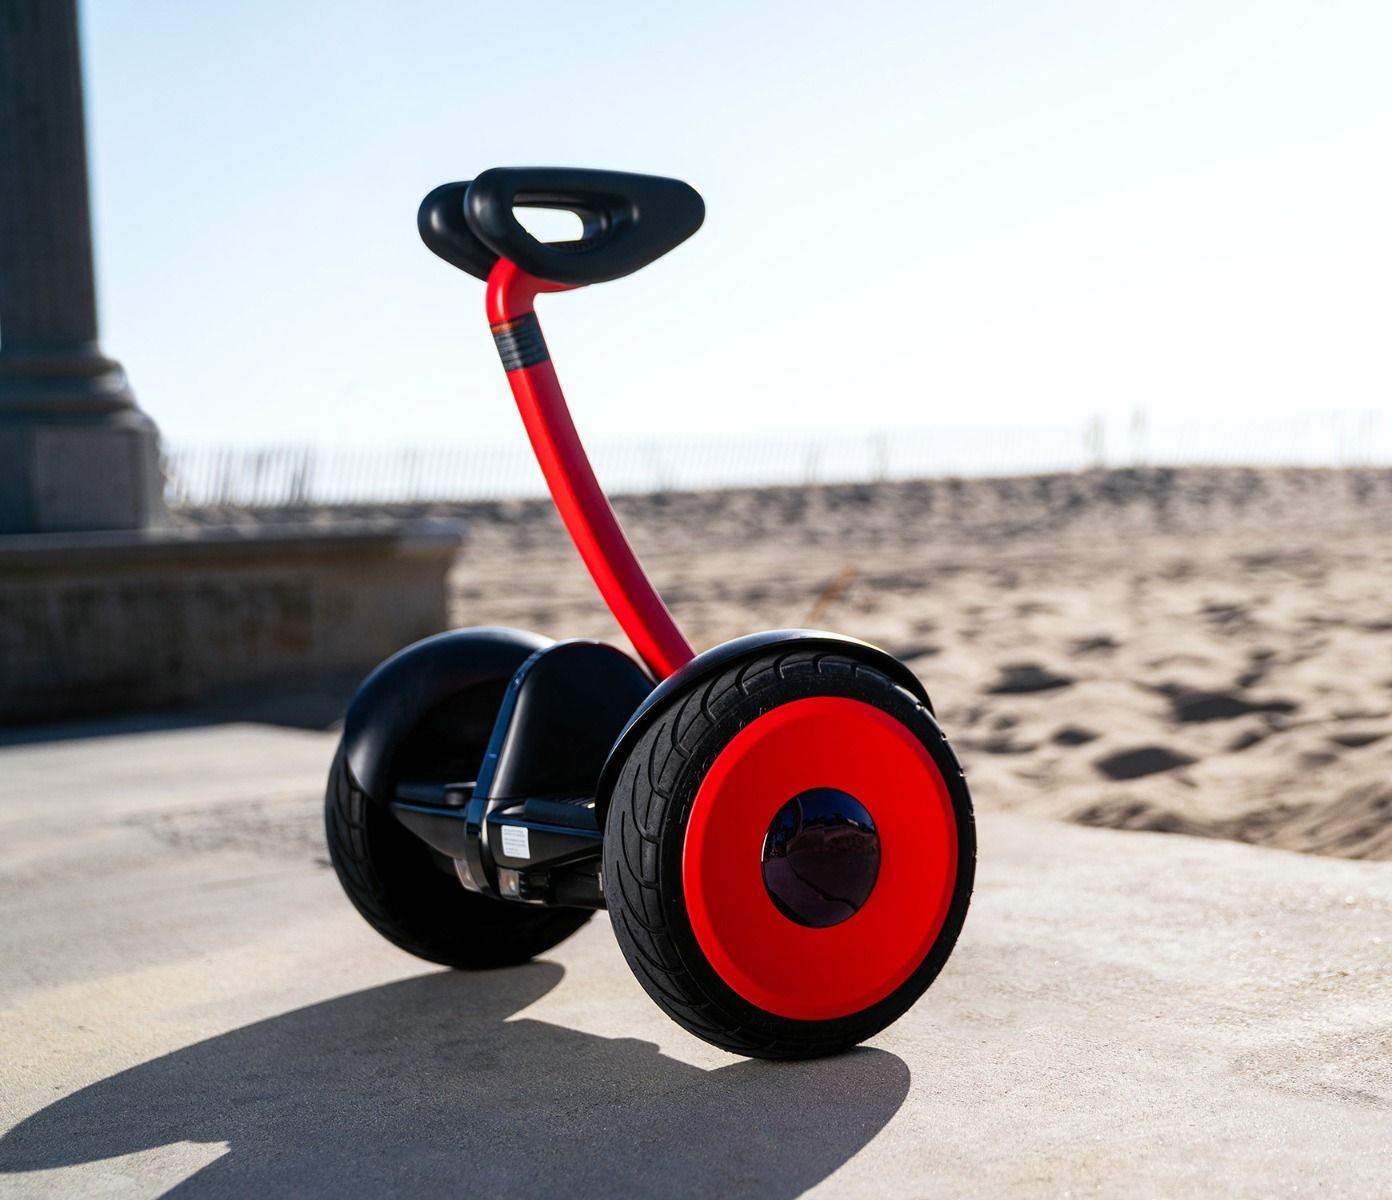 Segway Smart Self-Balancing Electric Transporter Ninebot S special red save $150+free shipping $399.99